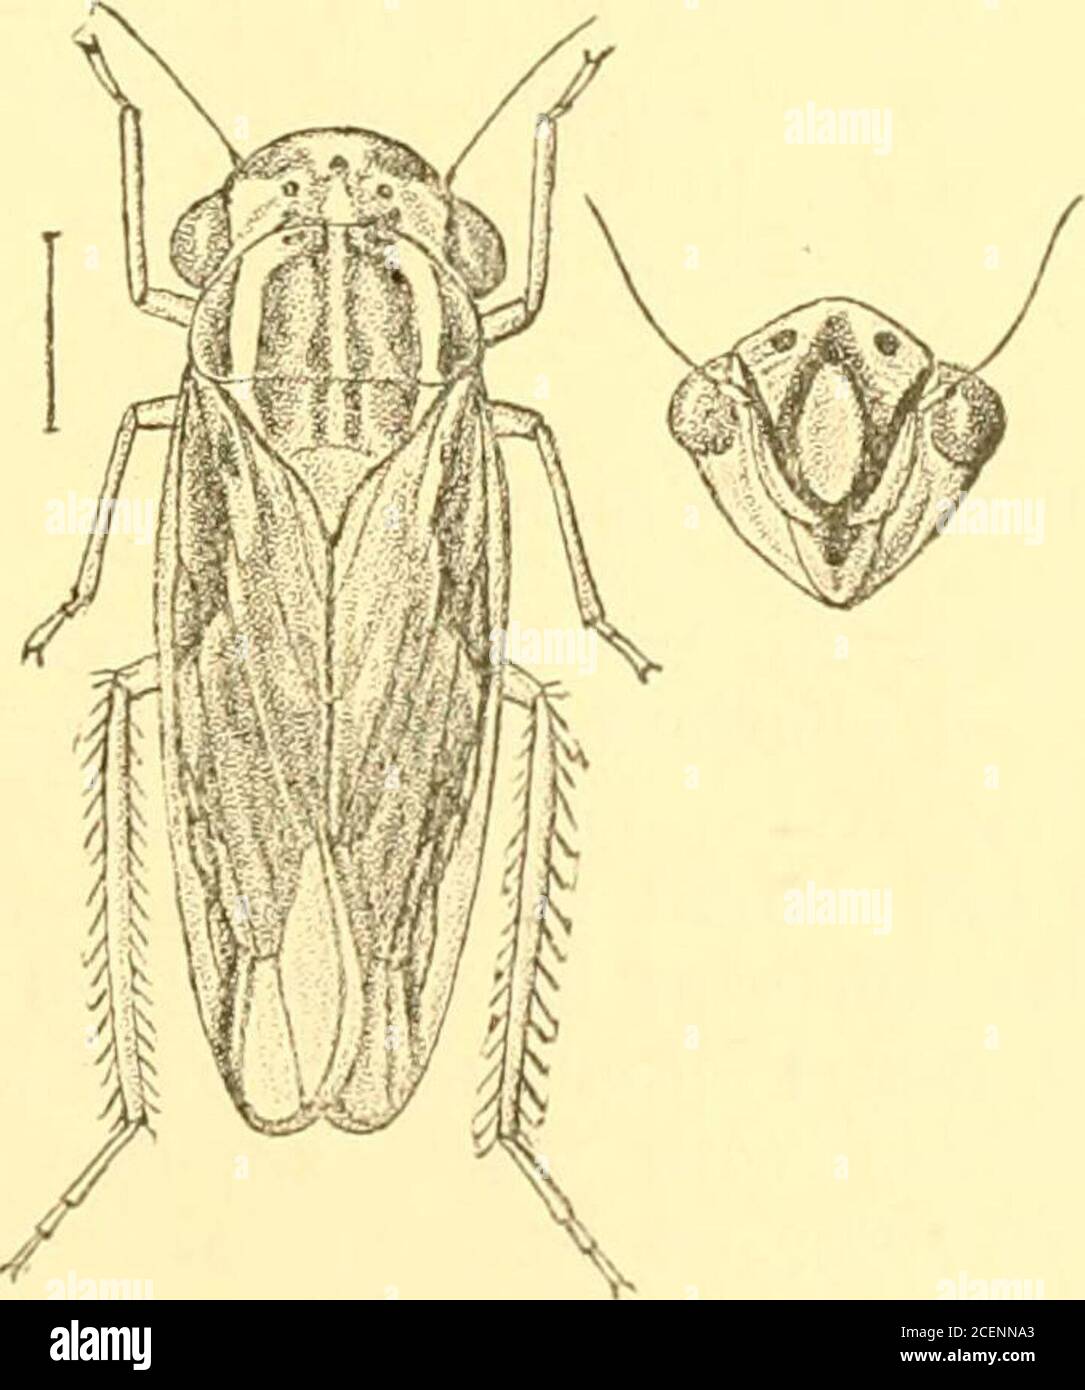 . Rhynchota ... (Tettigonia) Anji. Soc. Ent. Fr. 1853, p. 348, t. x, f. 5; Atkiyis. J. A. S. B, liv, p. 97 (1885). Head rounded anteriorly, yellow, with two facial fascia)united on the clypeus, white ; clypeus and rostrum black ; vertexwith two united half-moons; a median band, and on each sidetwo spots, black ; pronotum transverse with two fascia), theanterior one narrow and sinuated, the posterior fascia broad,uniting with the first, and on each side between them a transversepatch, black; scutellum with a semicircular fascia proceeding fromthe base black; tegmina fuscous, with a farinose pow Stock Photo